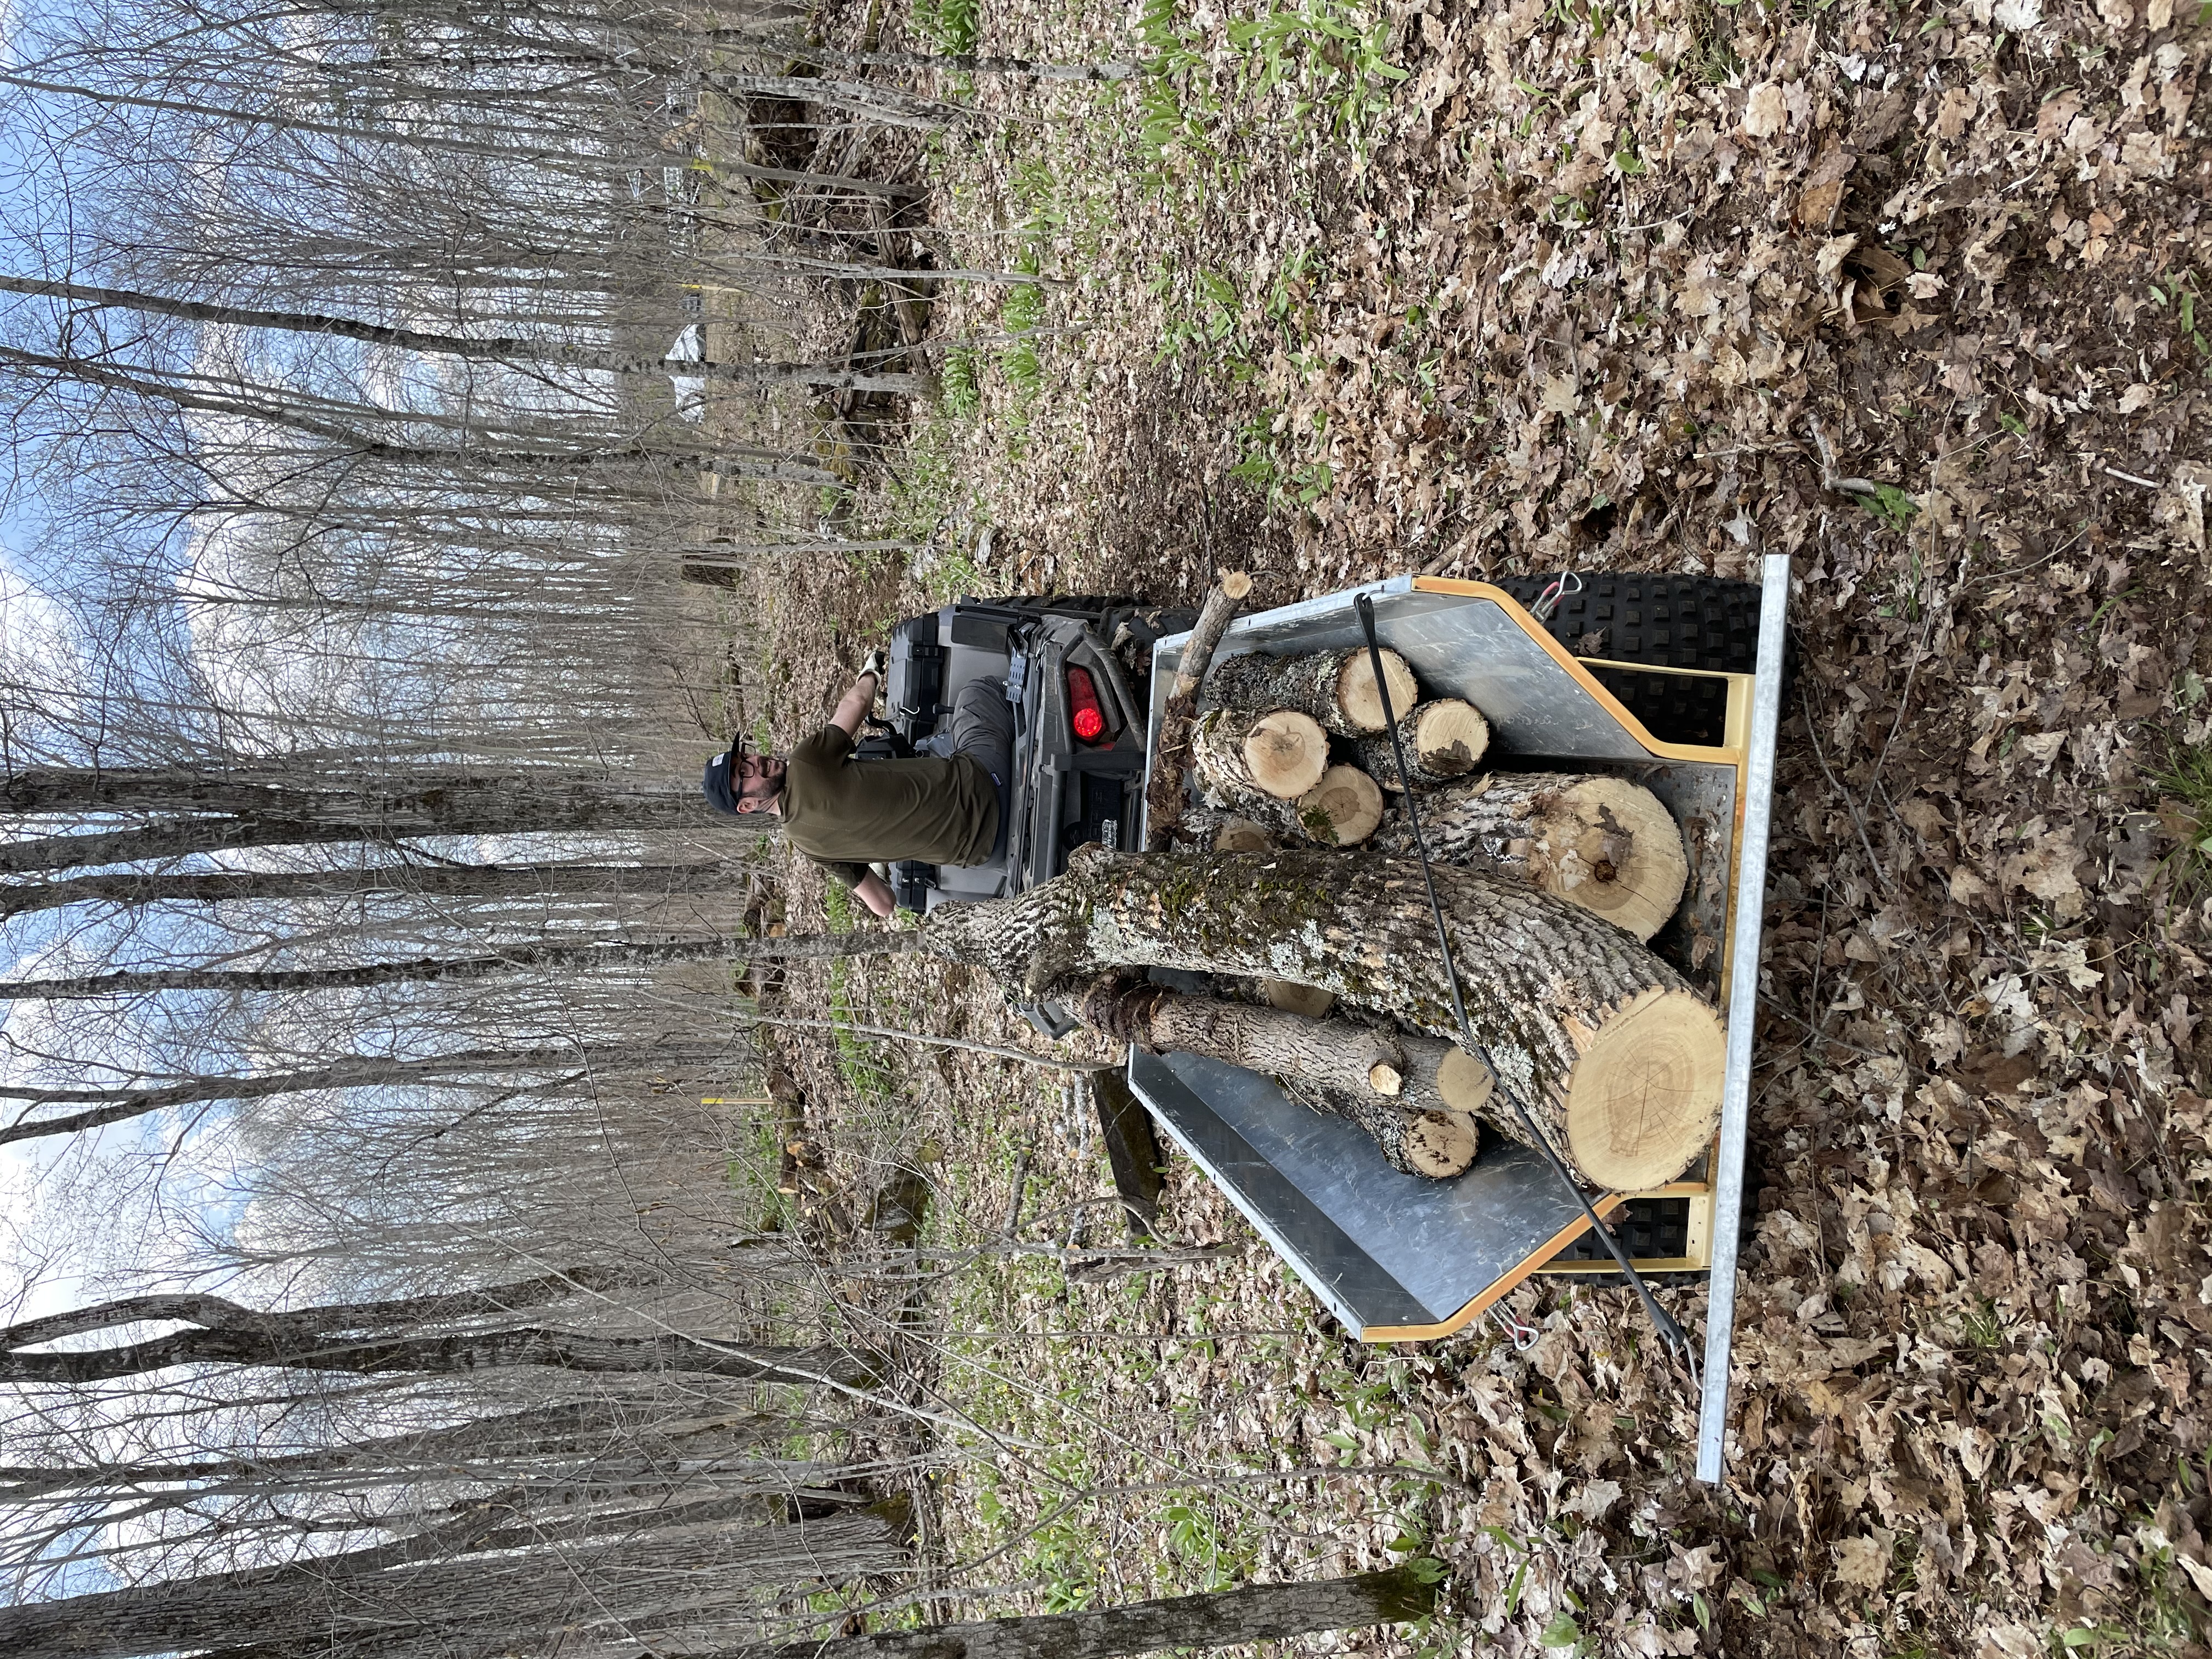 My friend driving an ATV load of Ash logs out of the forest